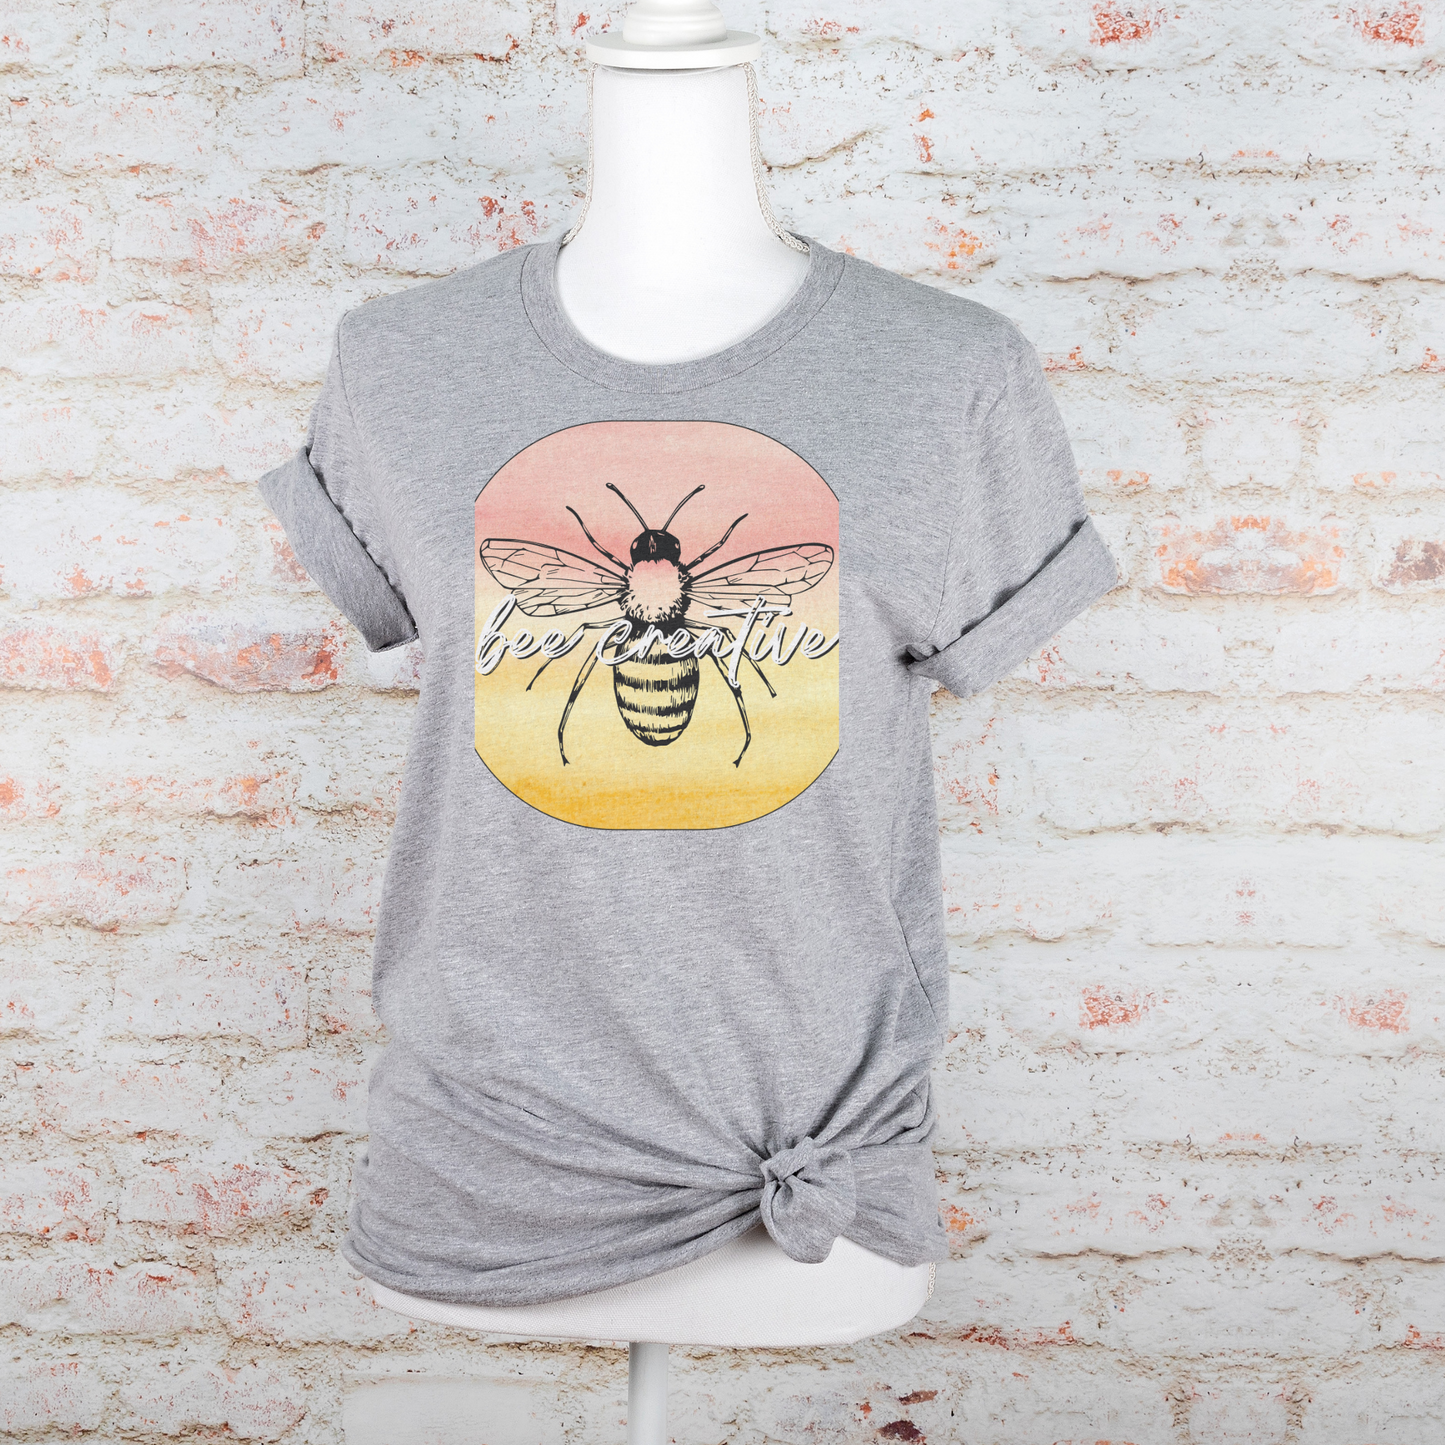 Bee Creative Orange Yellow Ombre Watercolor Background Makers Artists Crafters Unisex Jersey Short Sleeve Tee Small-3XL